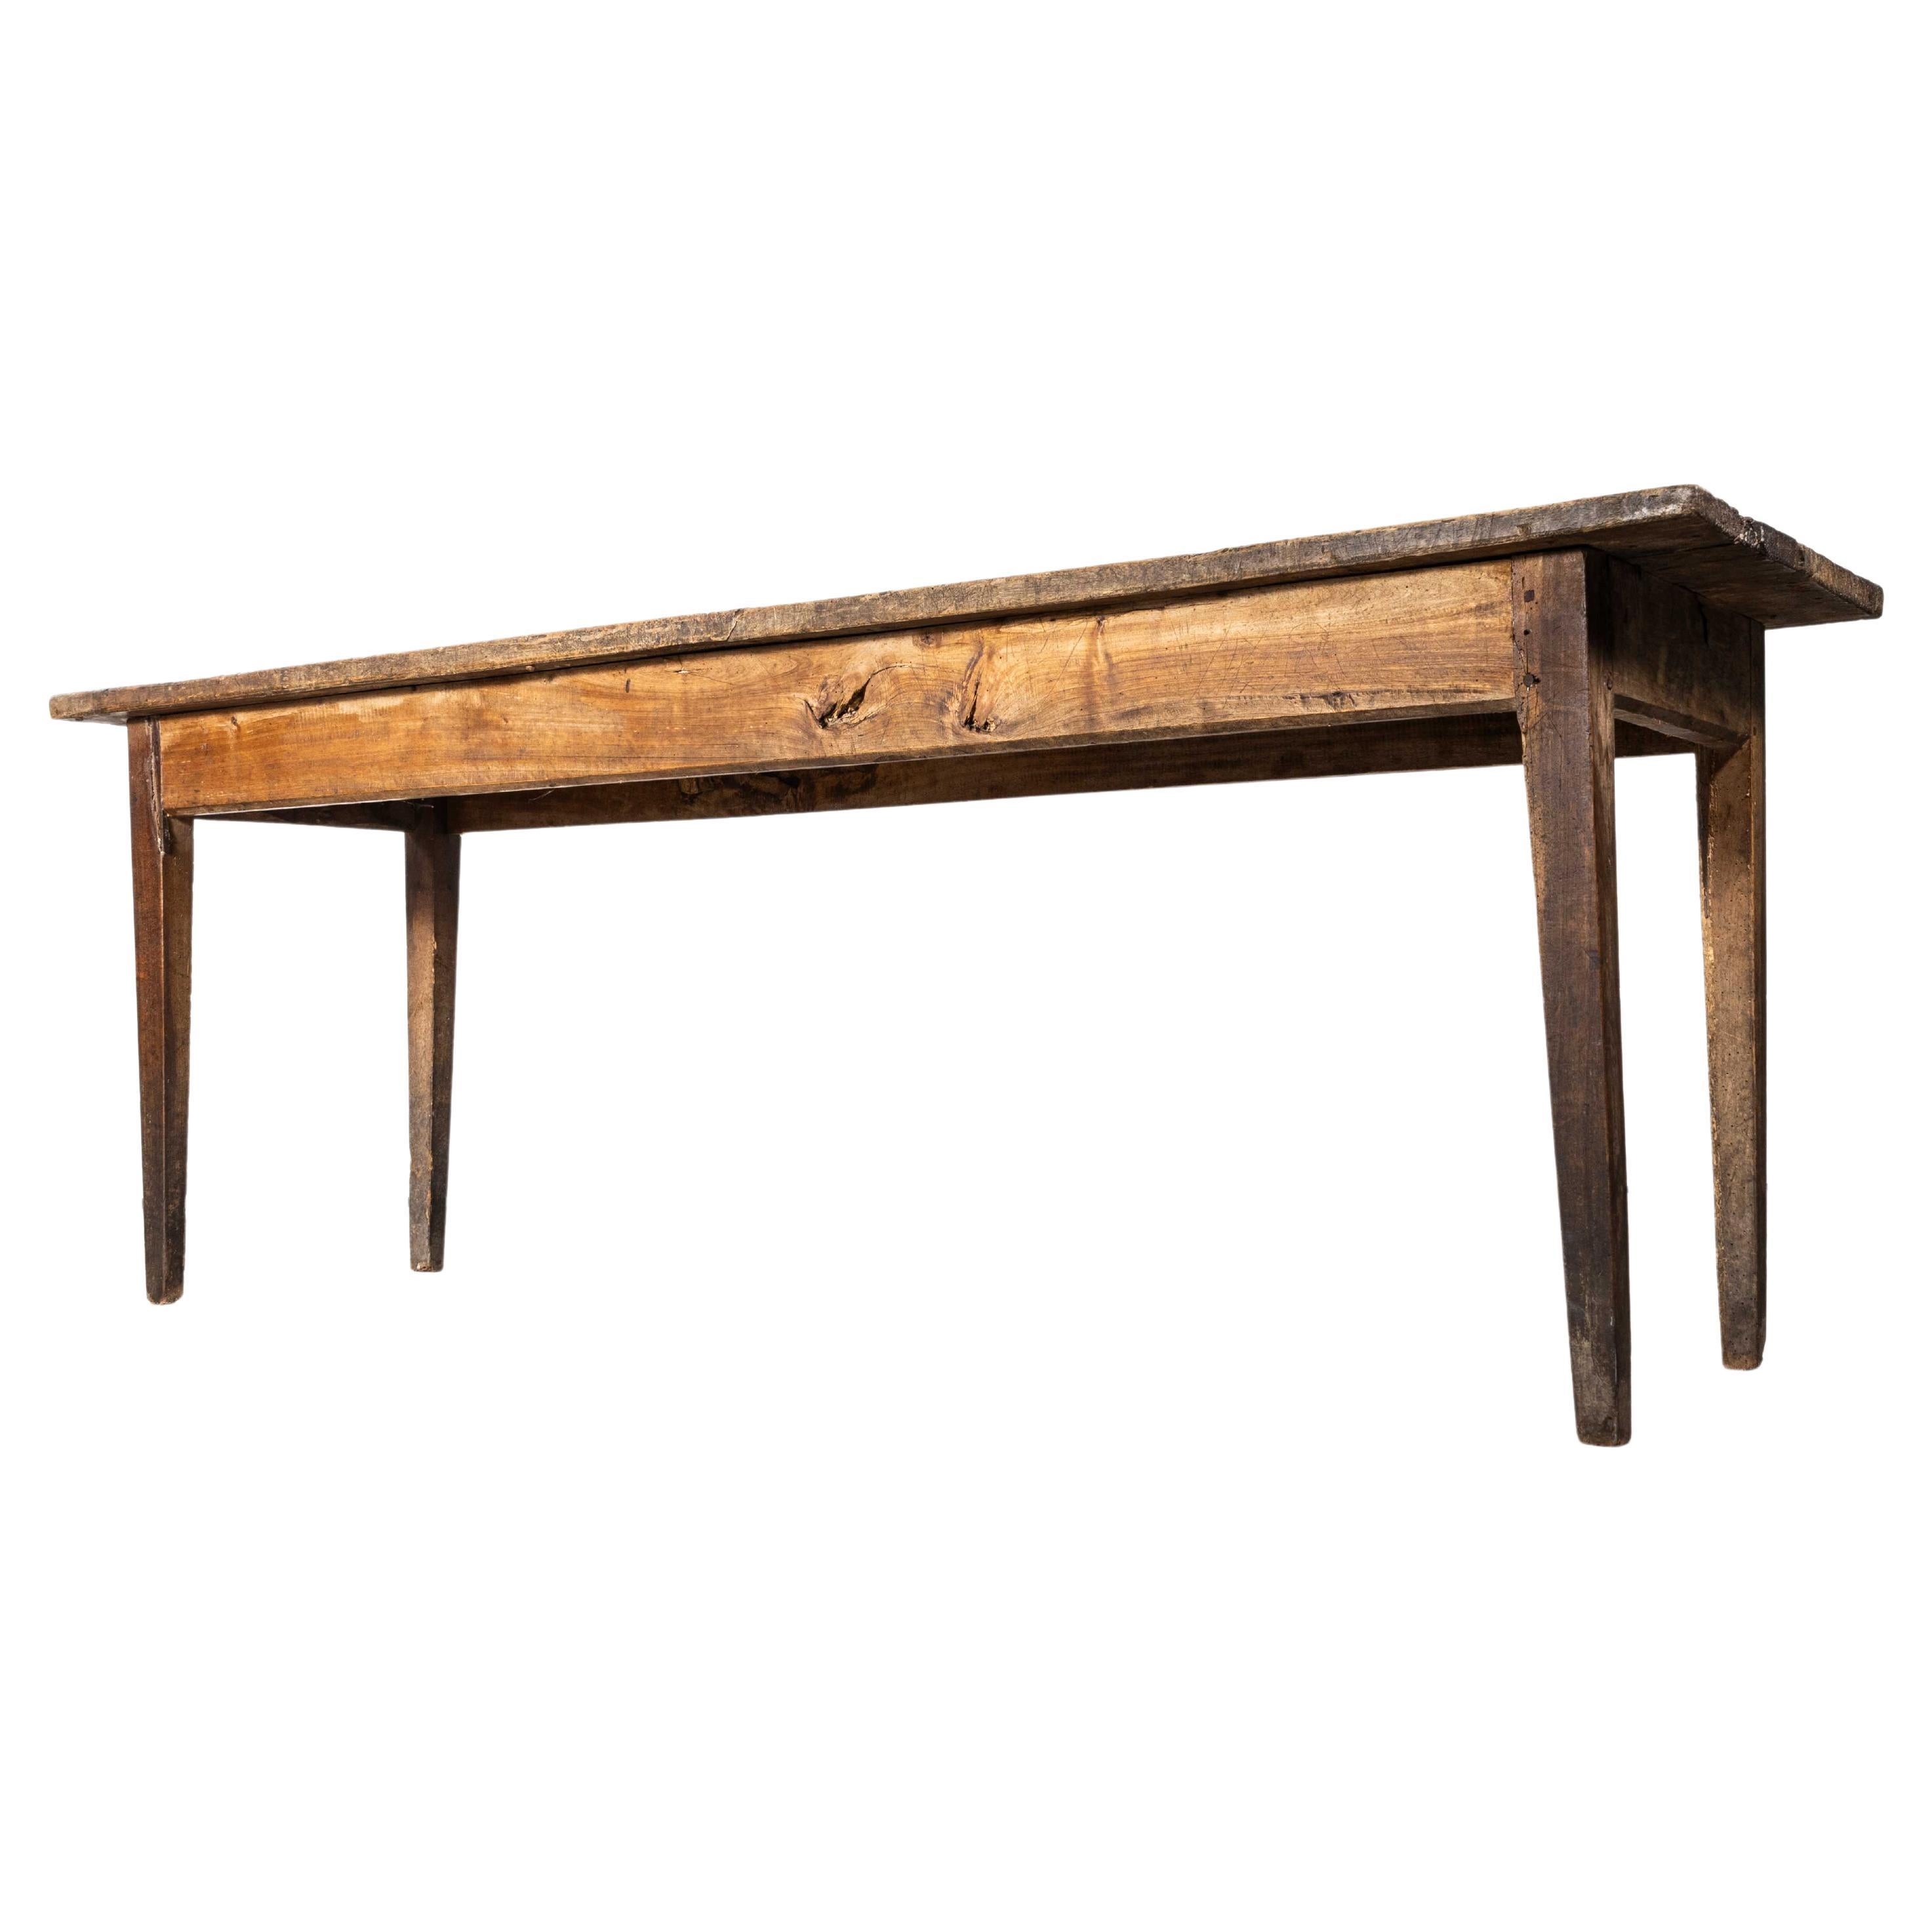 1940's French Narrow Farmhouse Table - Two Plank Top For Sale